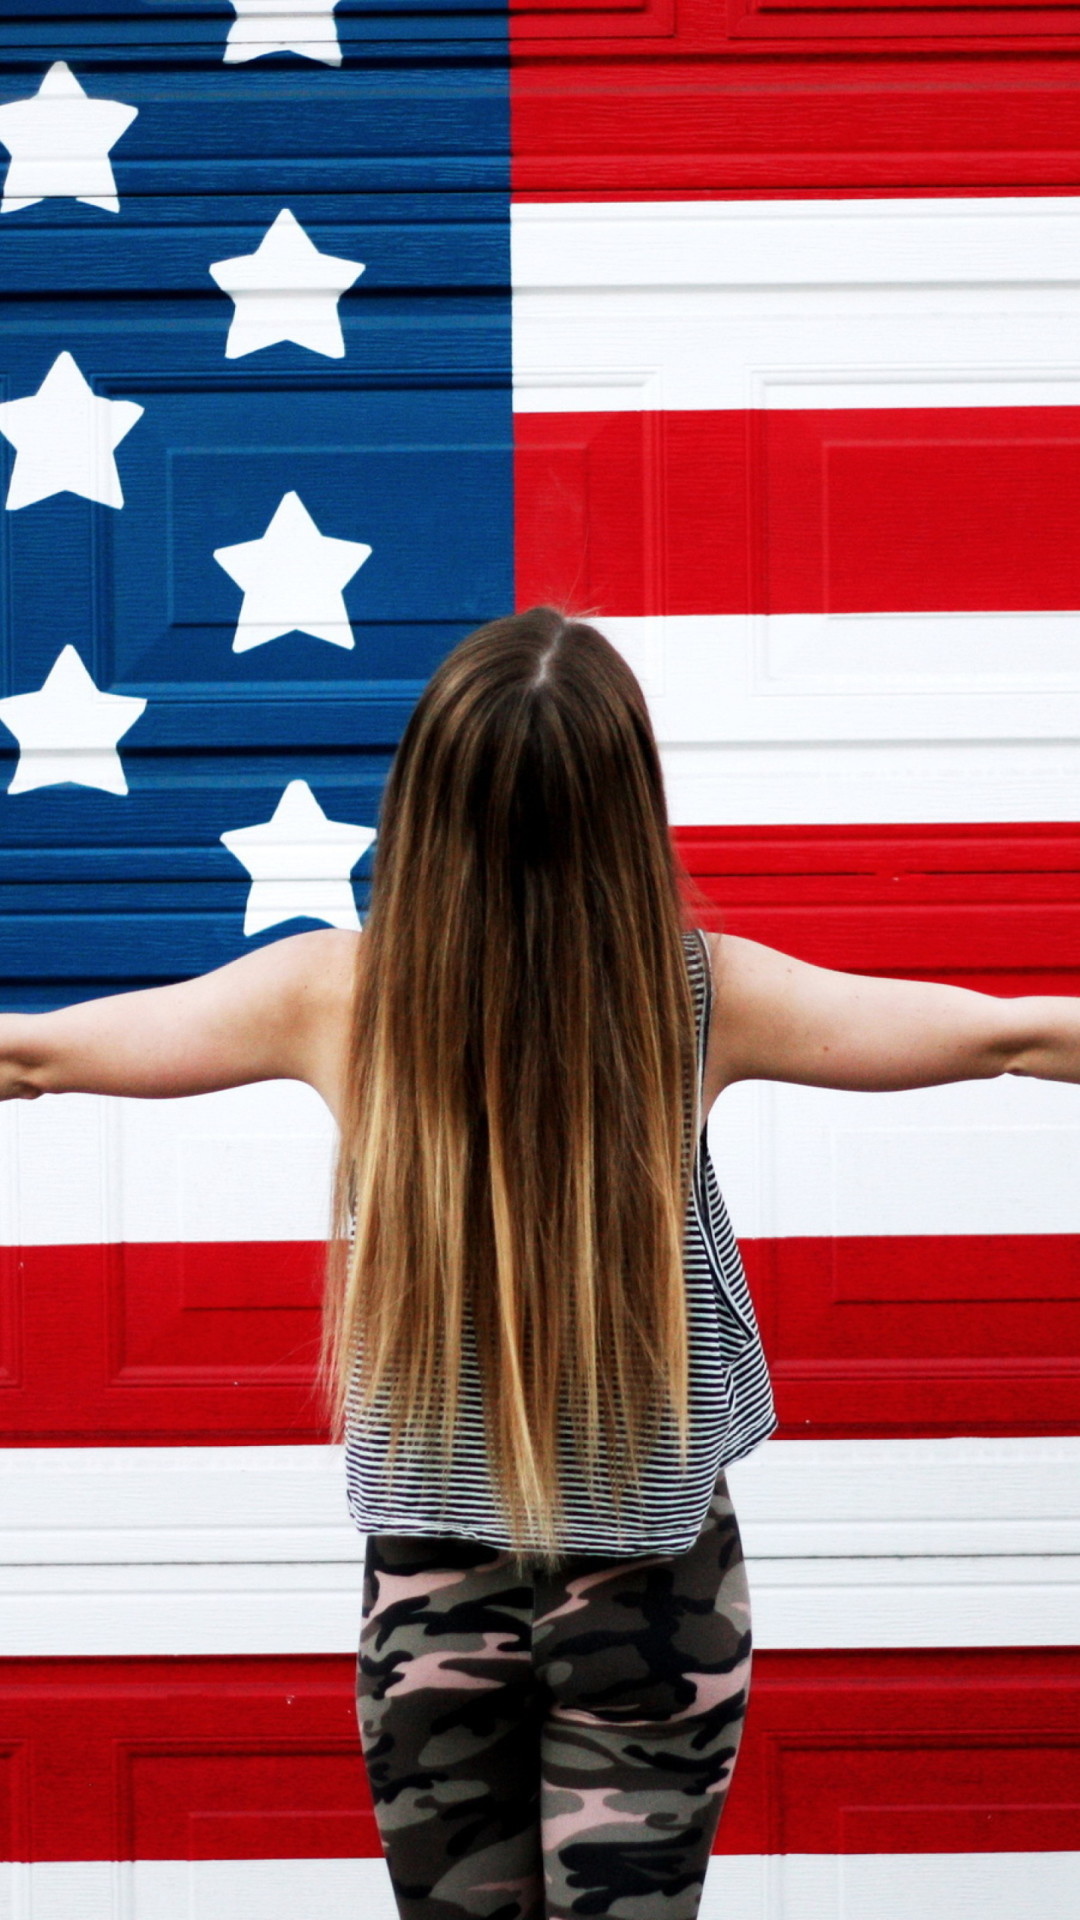 American girl in front of usa flags. america wallpaper